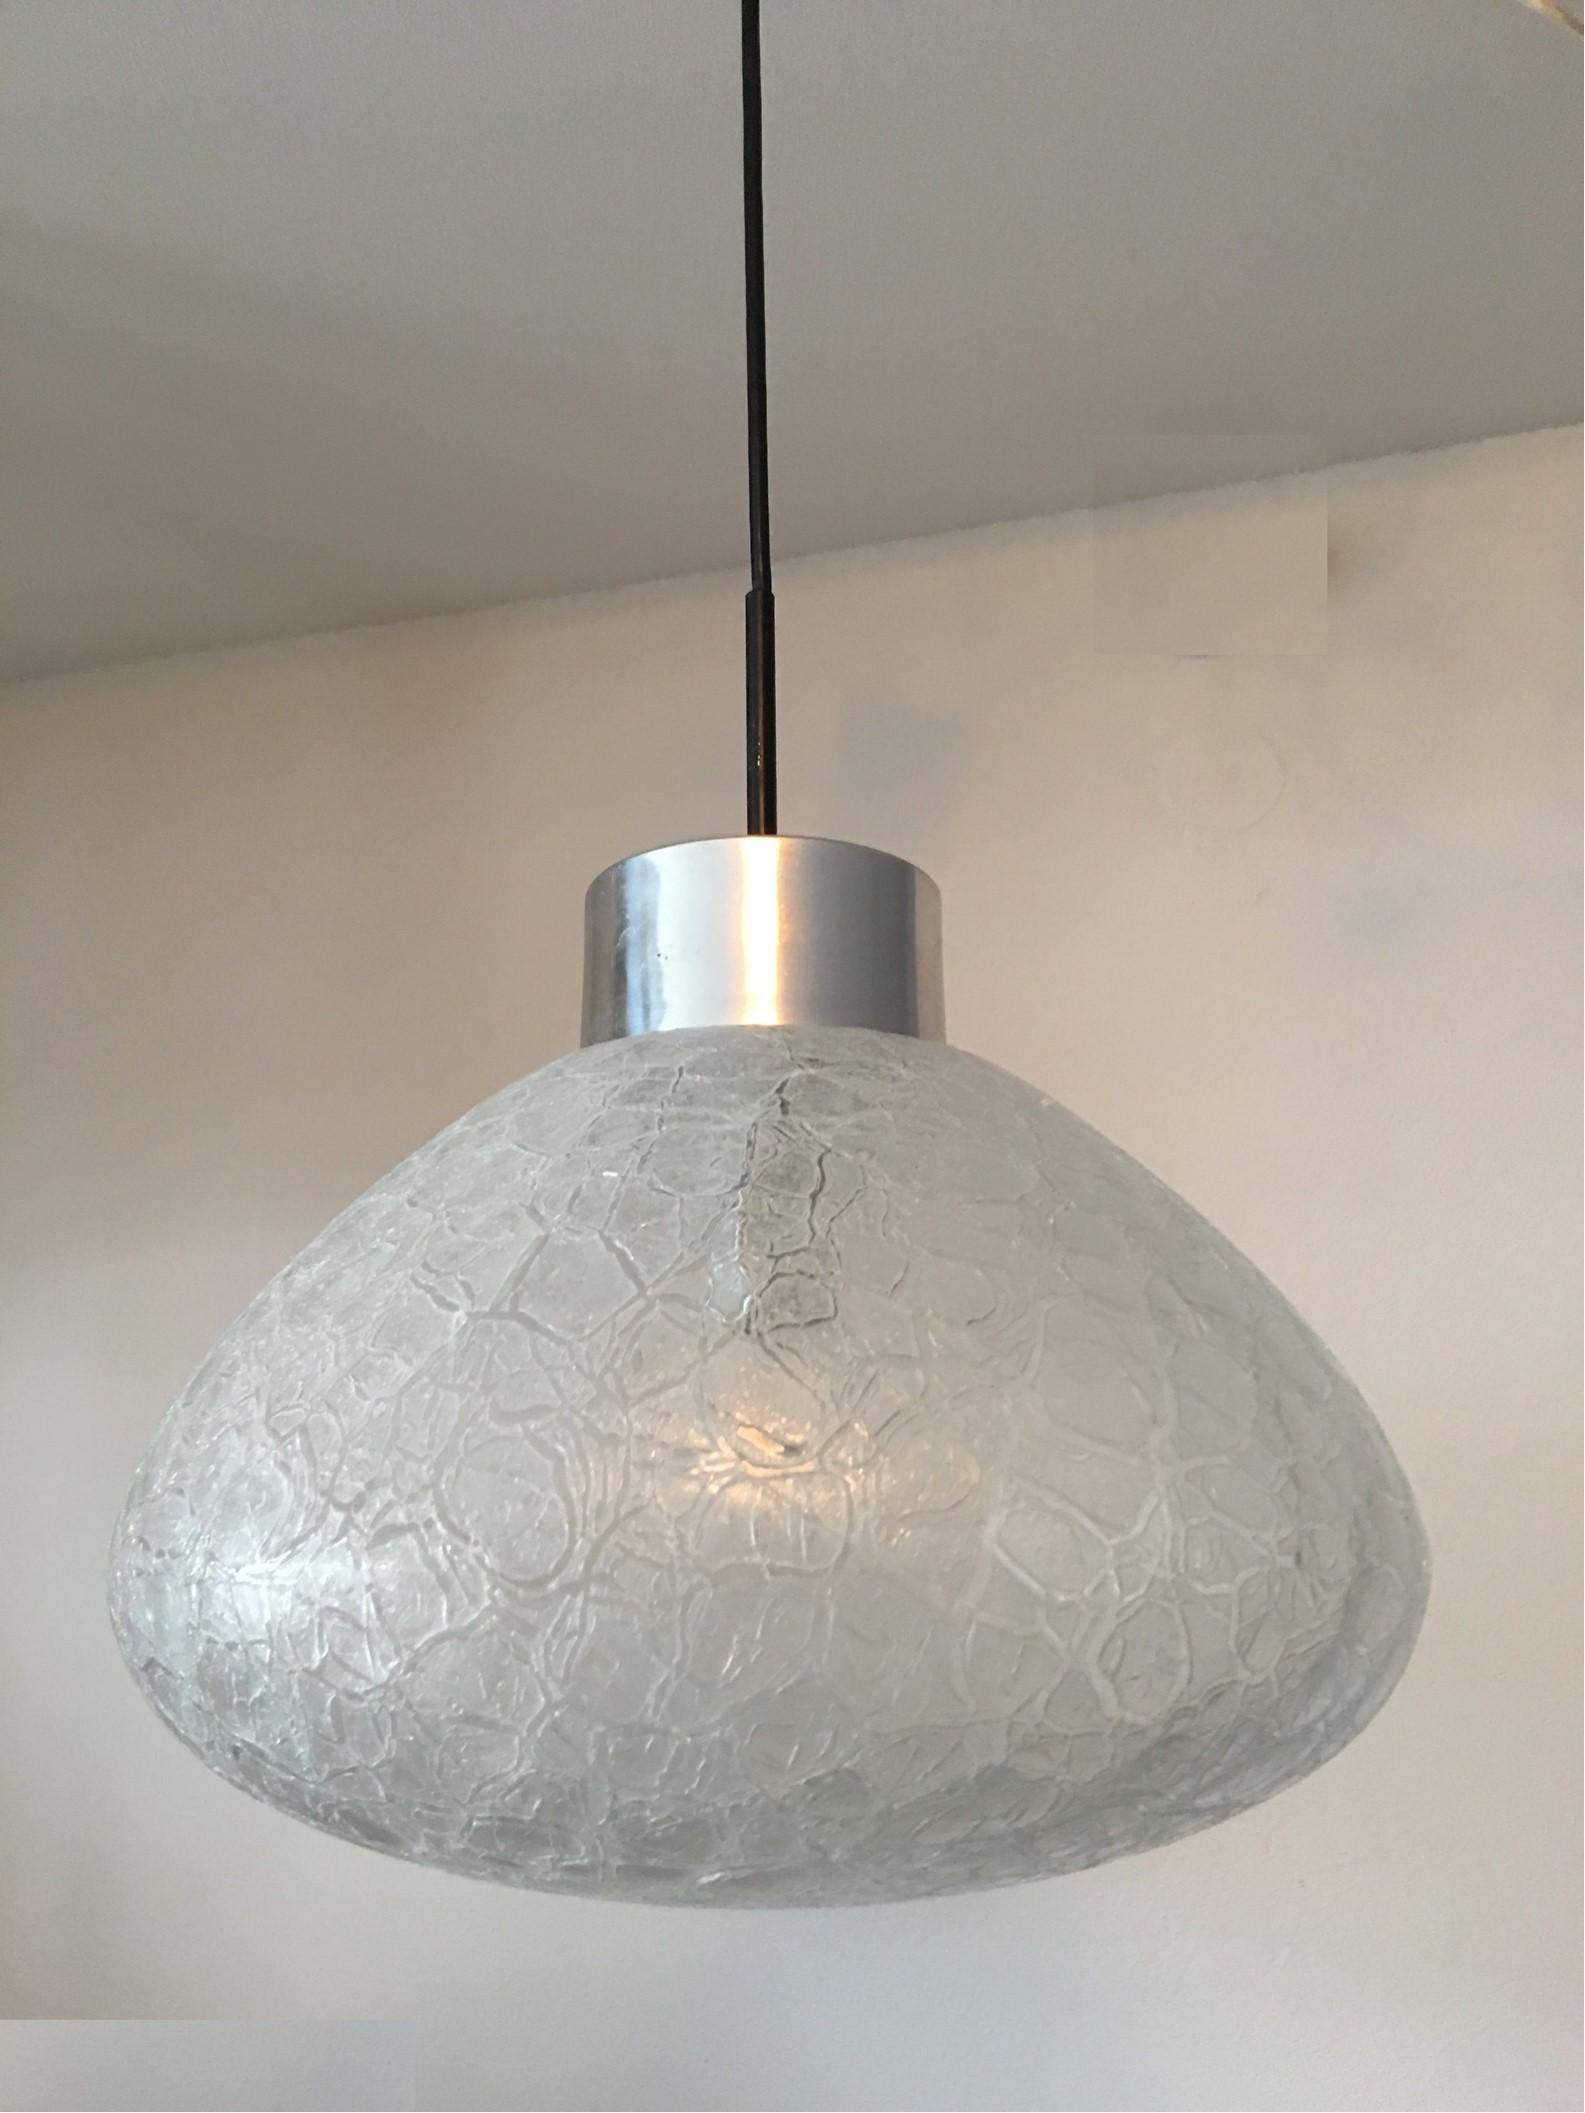 Beautiful, stylish glass drop pendant chandelier from the famous house of Doria, Germany. A company known for it's quality lighting fixtures. This chandelier requires one Edison E27 European bulb with a maximum up to 150 Watts. In working condition